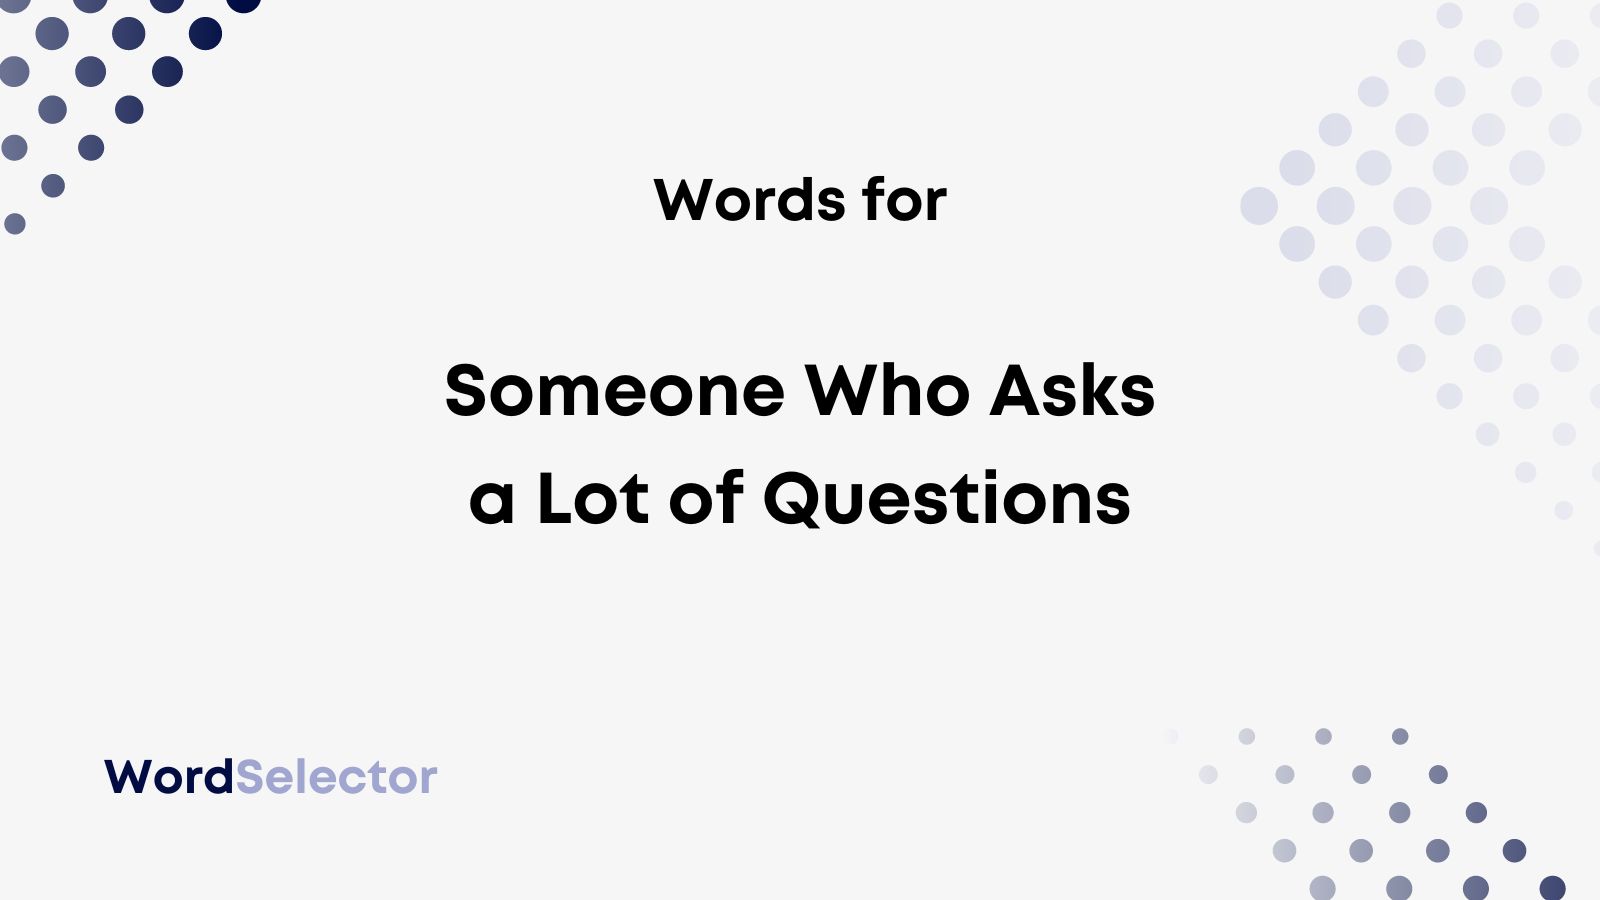 What Do You Call Someone Who Asks a Lot of Questions? - WordSelector